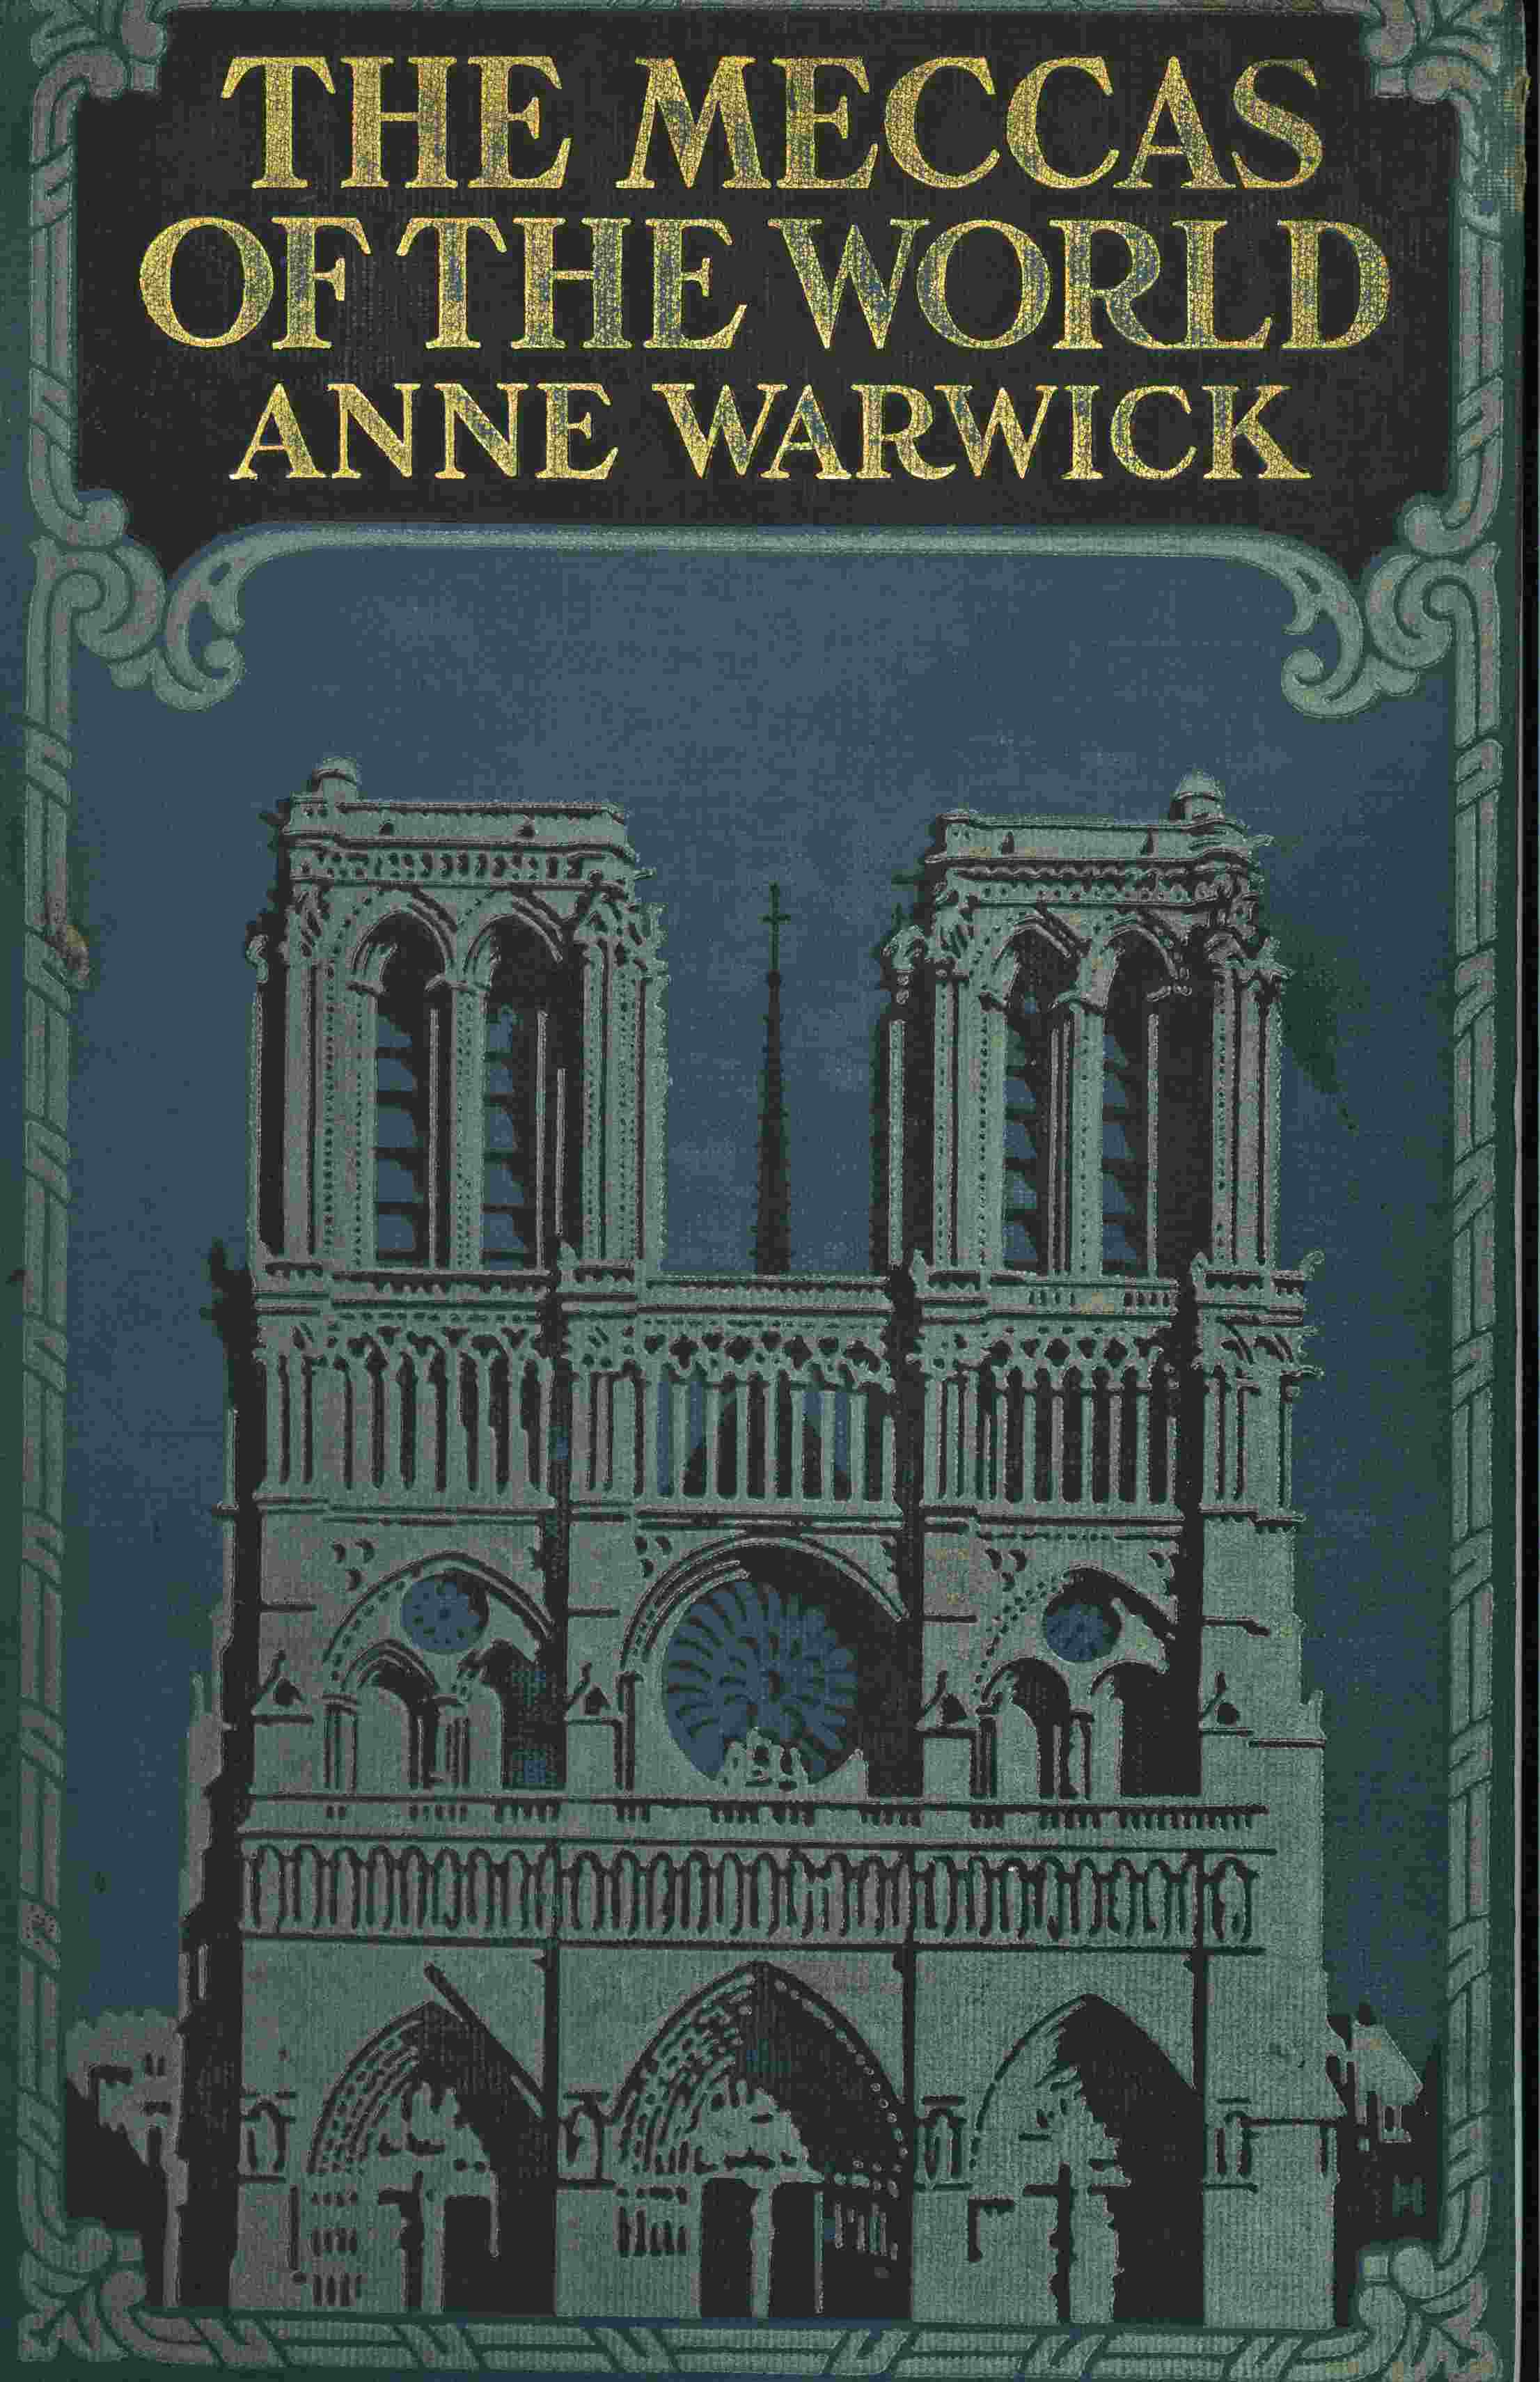 The Meccas of the World, by Anne Warwick—A Project Gutenberg eBook